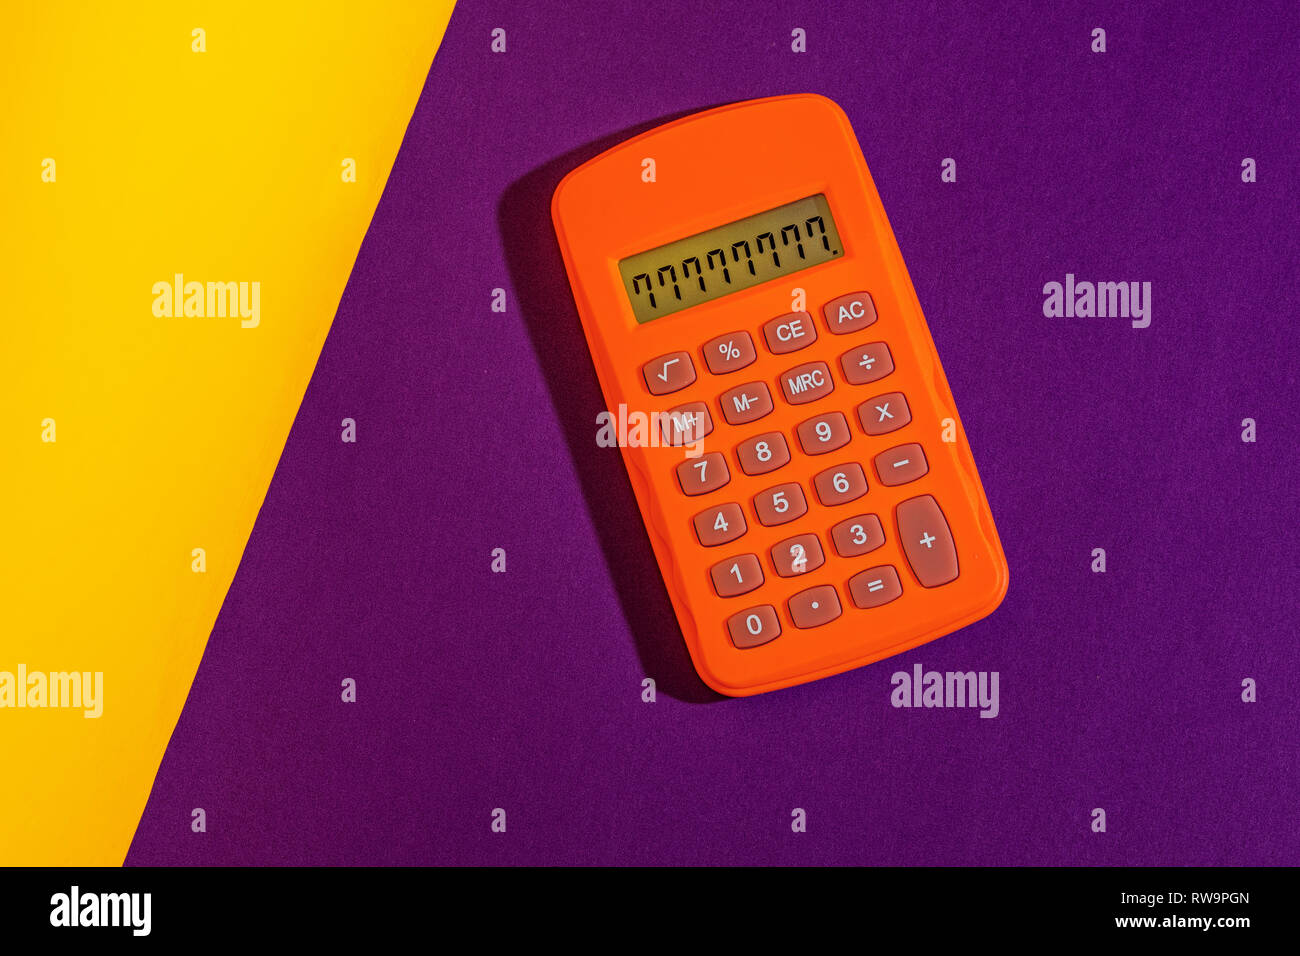 A graphic studio photo of an orange calculator on a purple and yellow background. Stock Photo